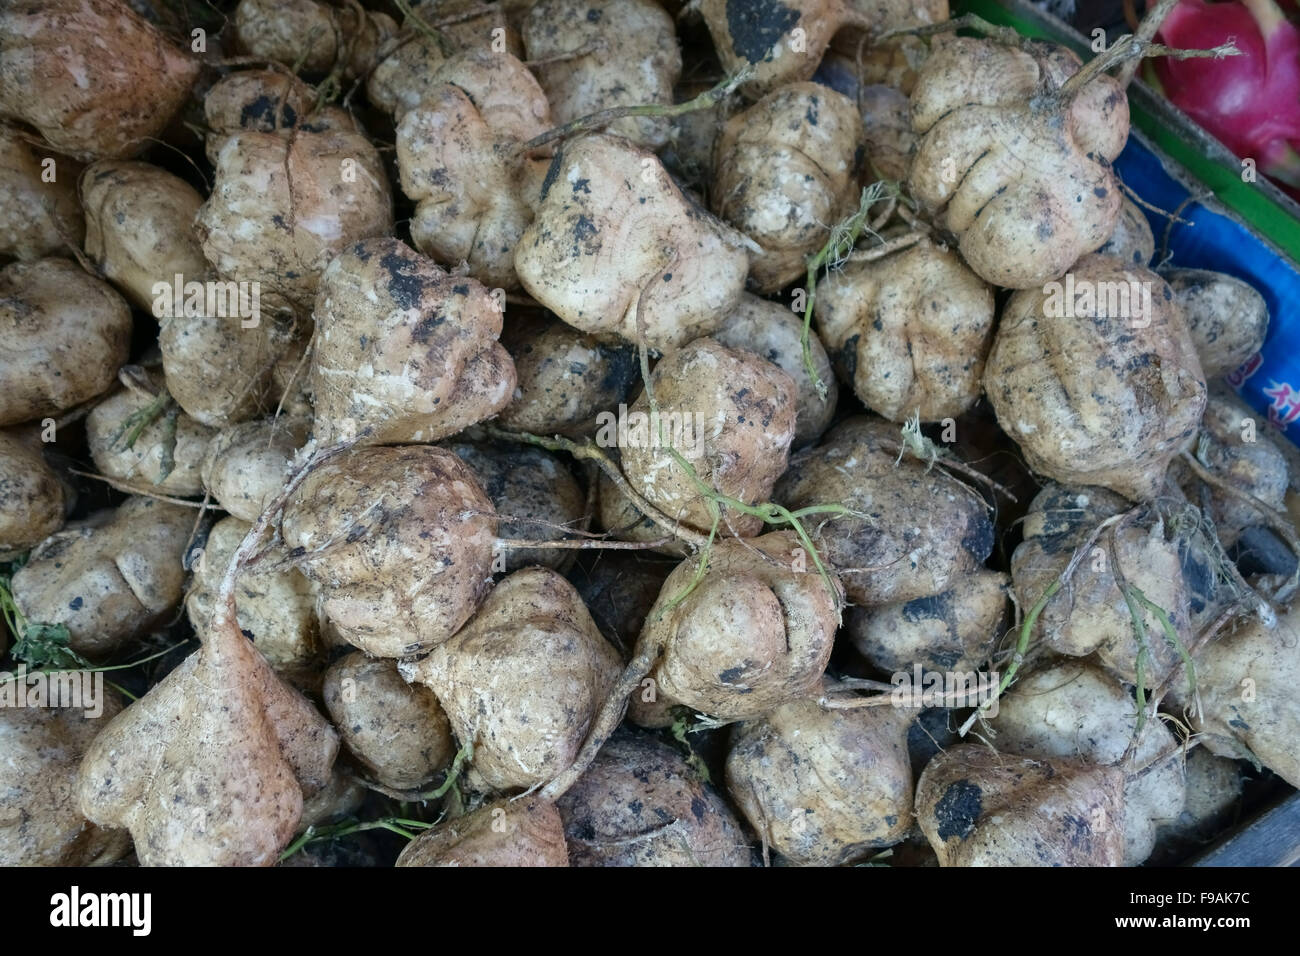 Jicama, Mexican yambean or Mexican turnip tuberous roots for sale in a Bangkok wet food market, Thailand Stock Photo